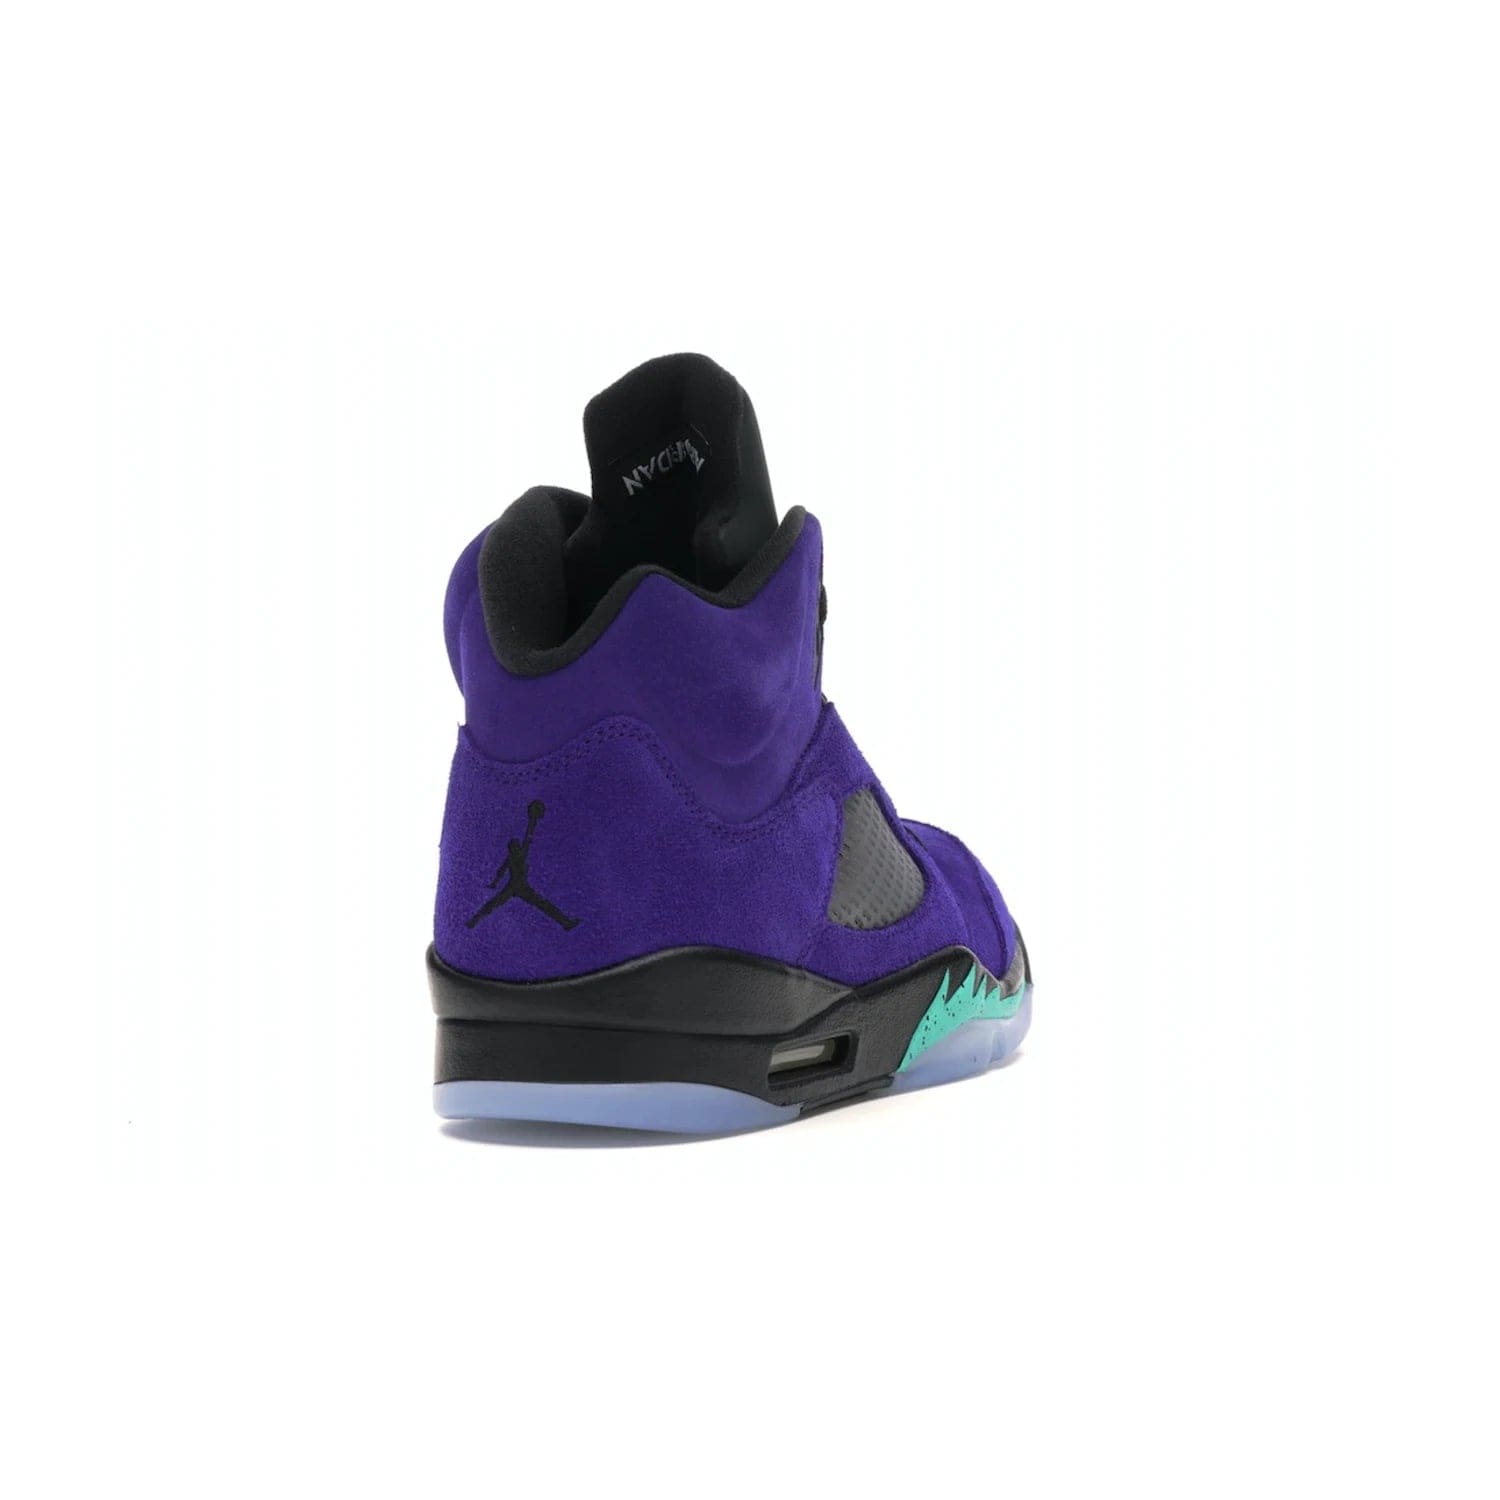 Jordan 5 Retro Alternate Grape - Image 30 - Only at www.BallersClubKickz.com - Bring the classic Jordan 5 Retro Alternate Grape to your sneaker collection! Featuring a purple suede upper, charcoal underlays, green detailing, and an icy and green outsole. Releasing for the first time since 1990, don't miss this chance to add a piece of sneaker history to your collection.